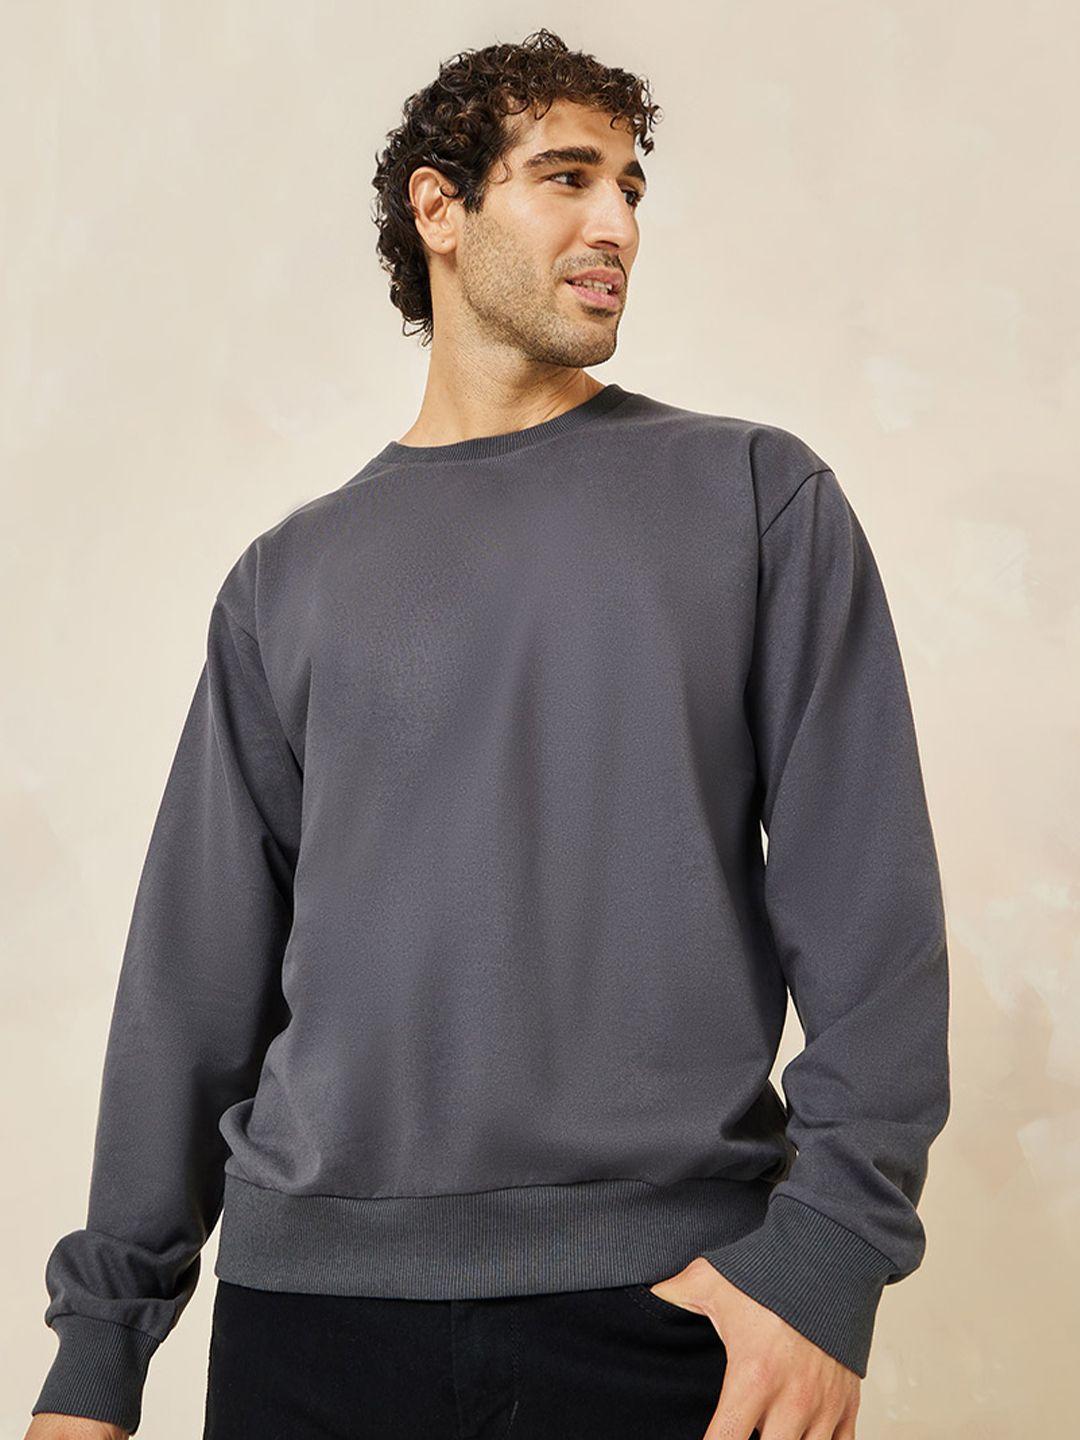 styli-relaxed-fit-cotton-terry-sweatshirt